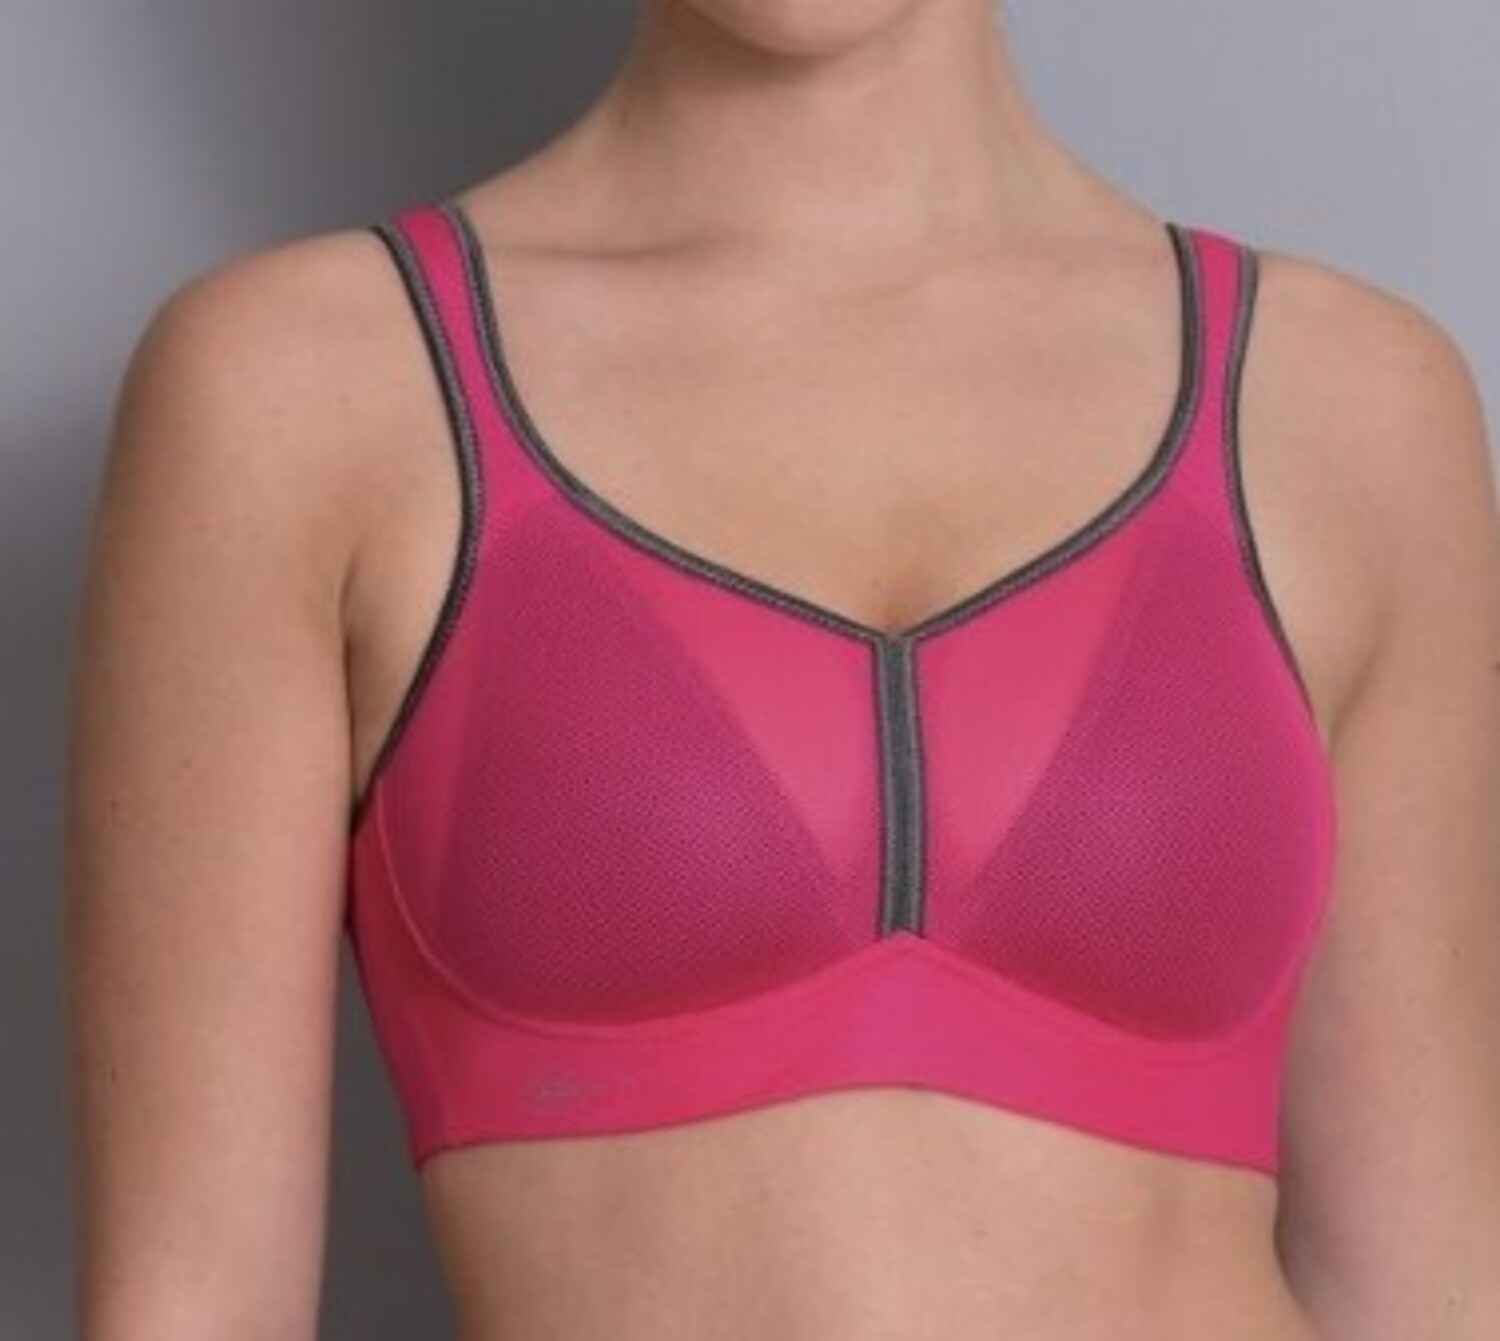  5544-107 Womens Active Smart Rose Pink Padded Sports Bra 32G